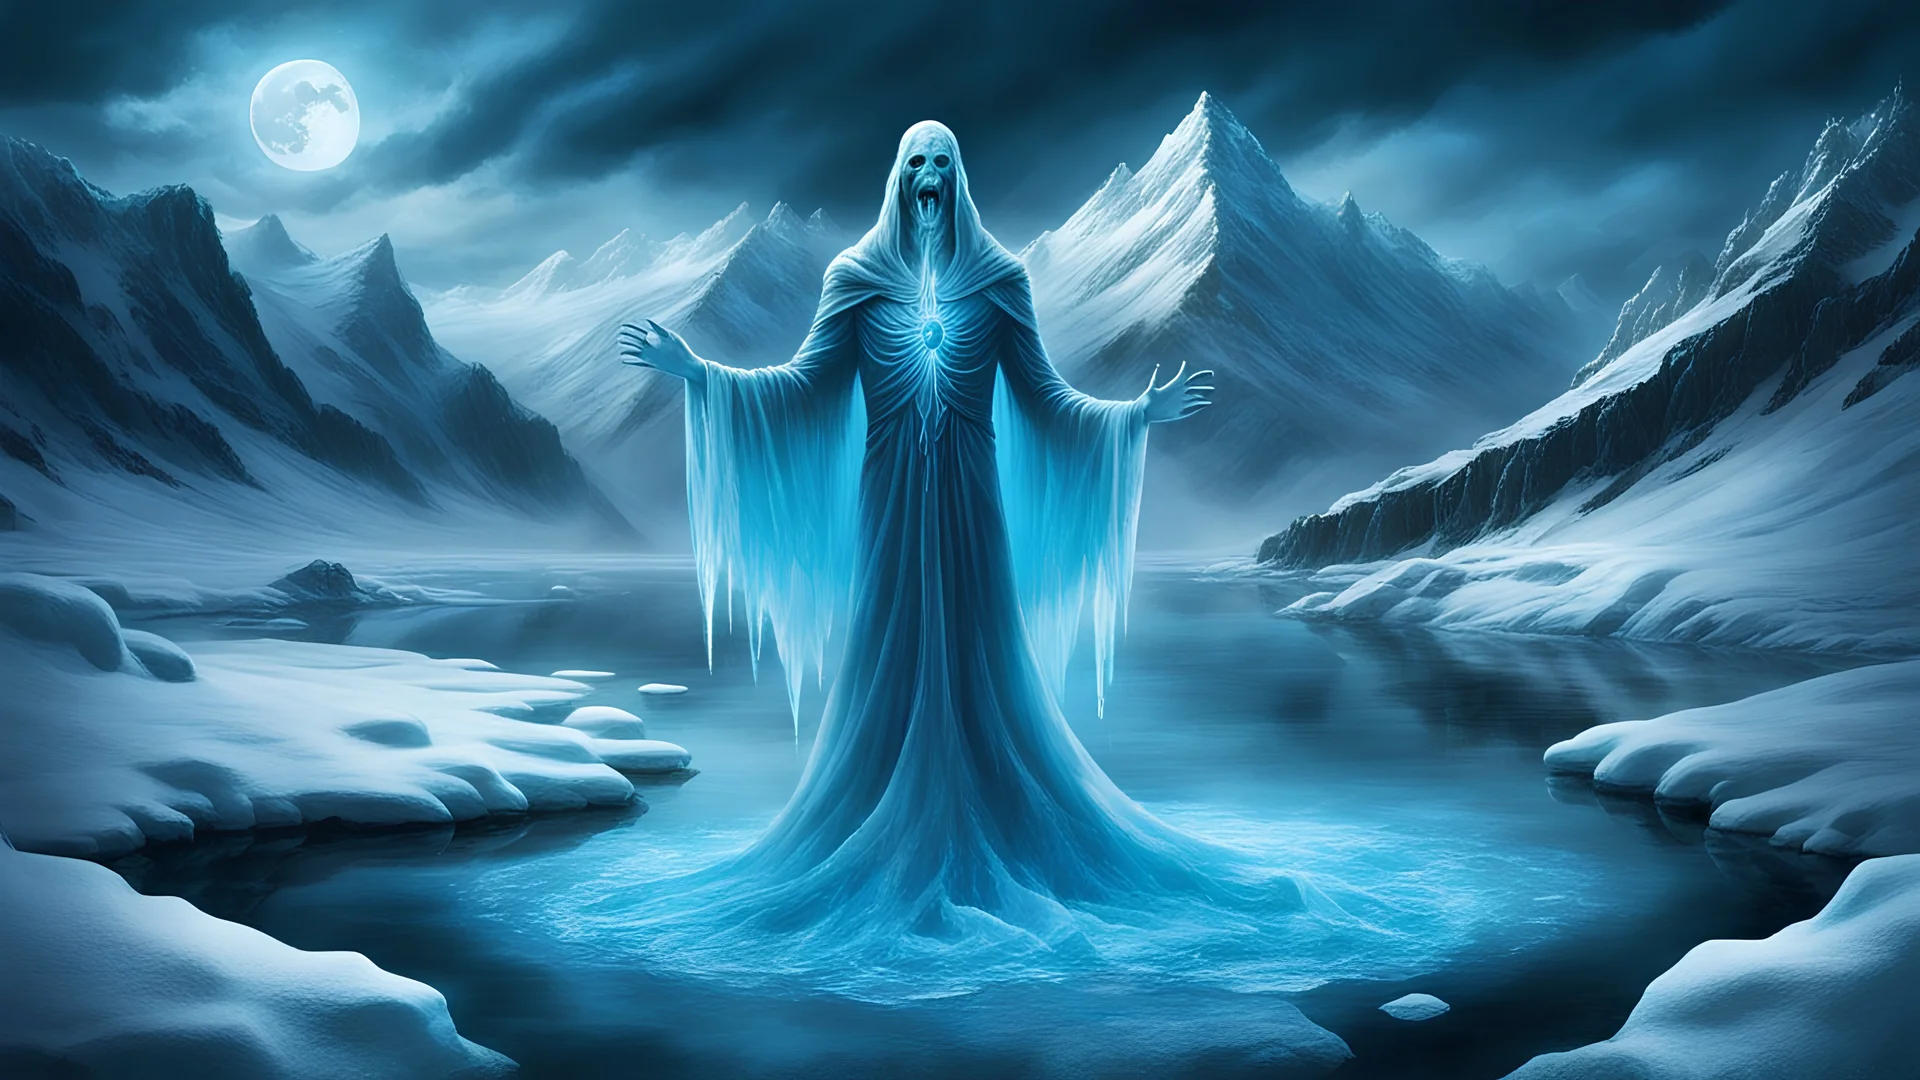 an ice ghost undead deathless draugr, inhuman horrifying ice wraith, floating hovering; evil spirit, bright blue eyes, a shimmer of blue magic; frozen landscape, glacier in the background; dark skies, night time, full moon, storm clouds;